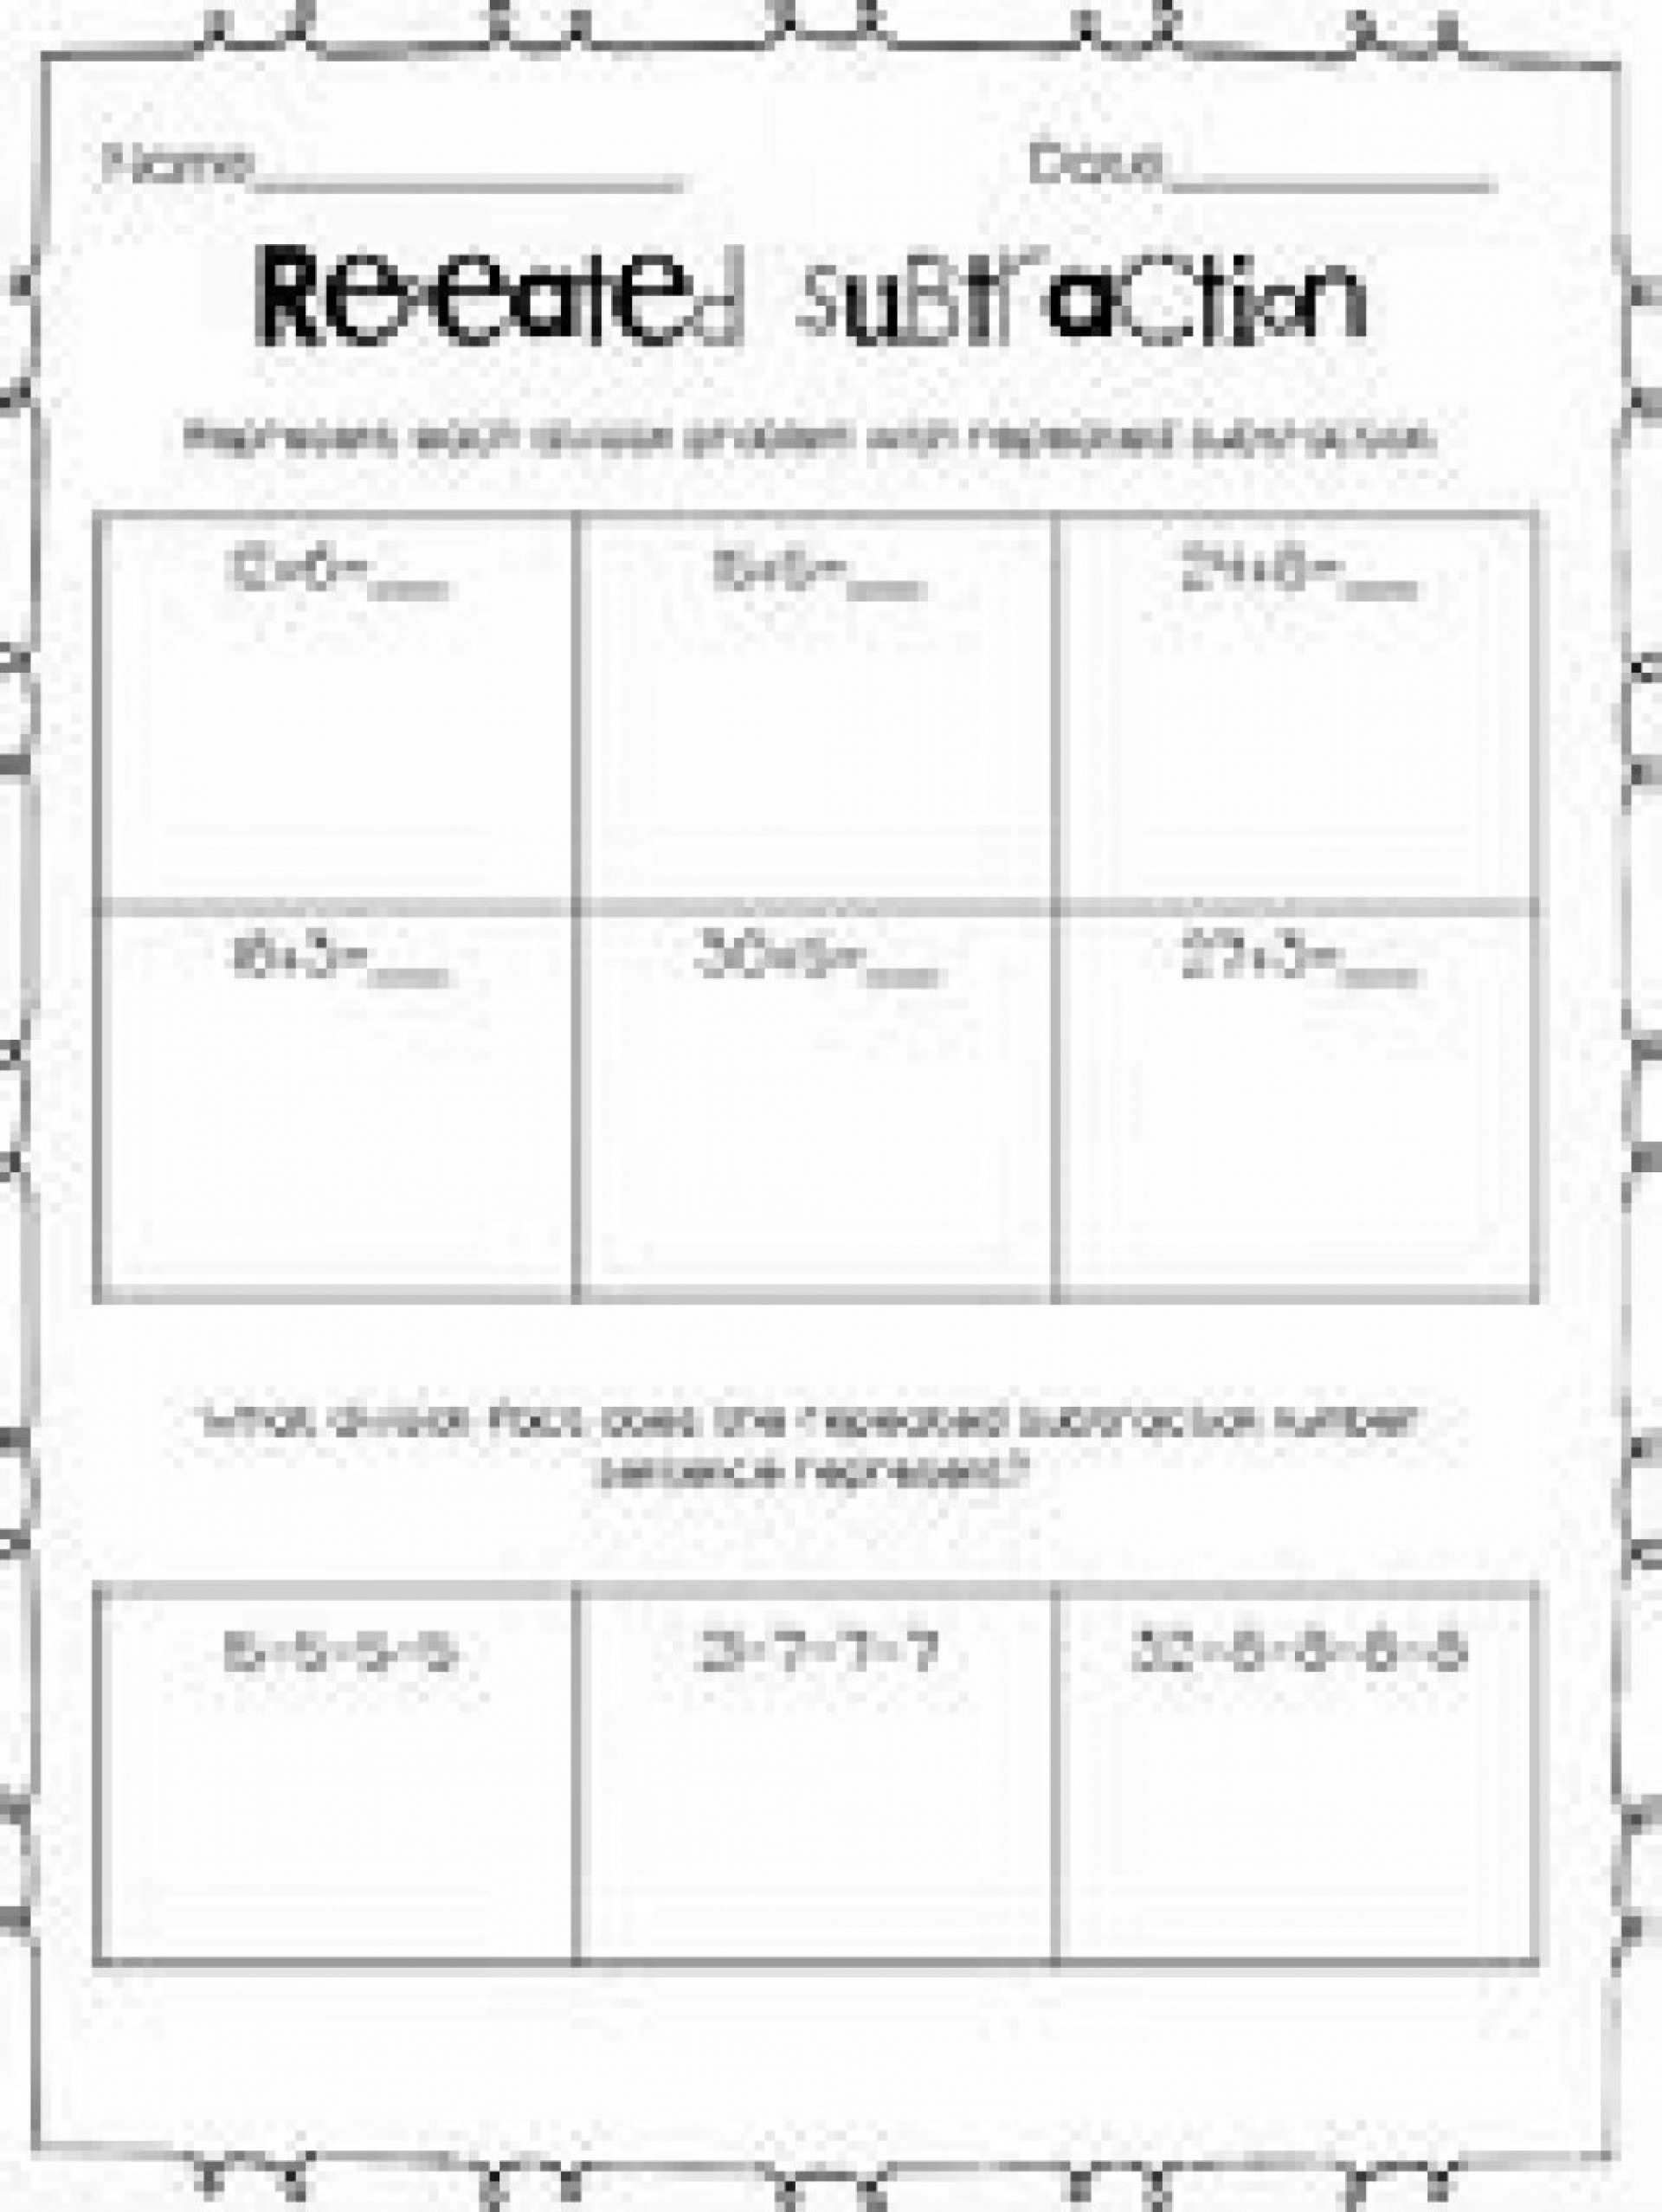 Repeated Subtraction Worksheets | db-excel.com